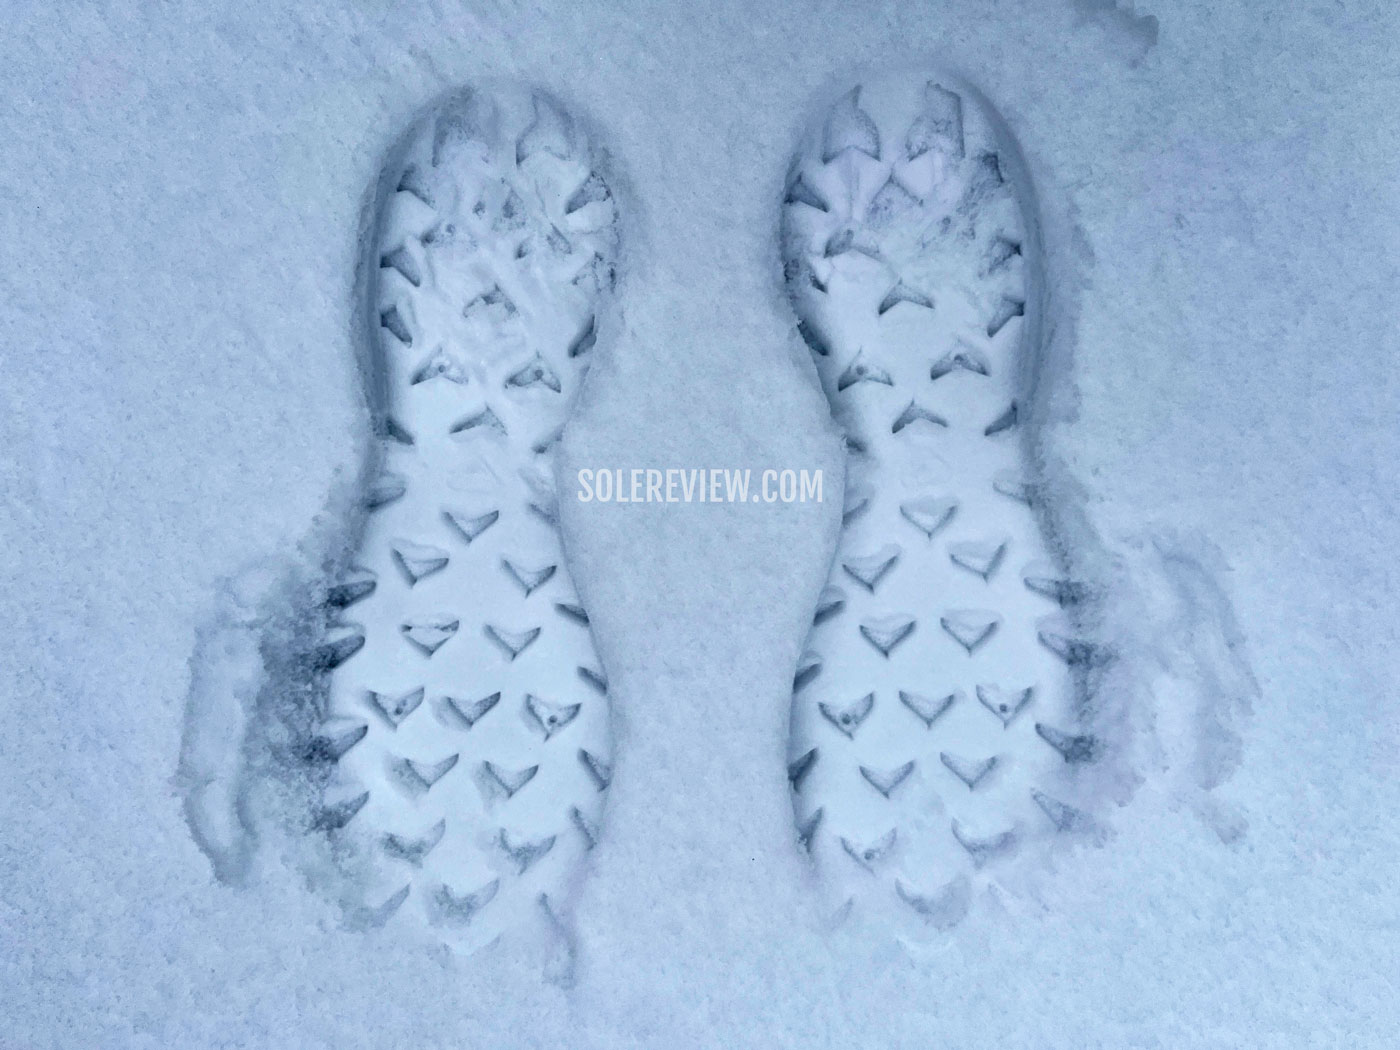 The outsole footprint of the Salomon Snowcross.